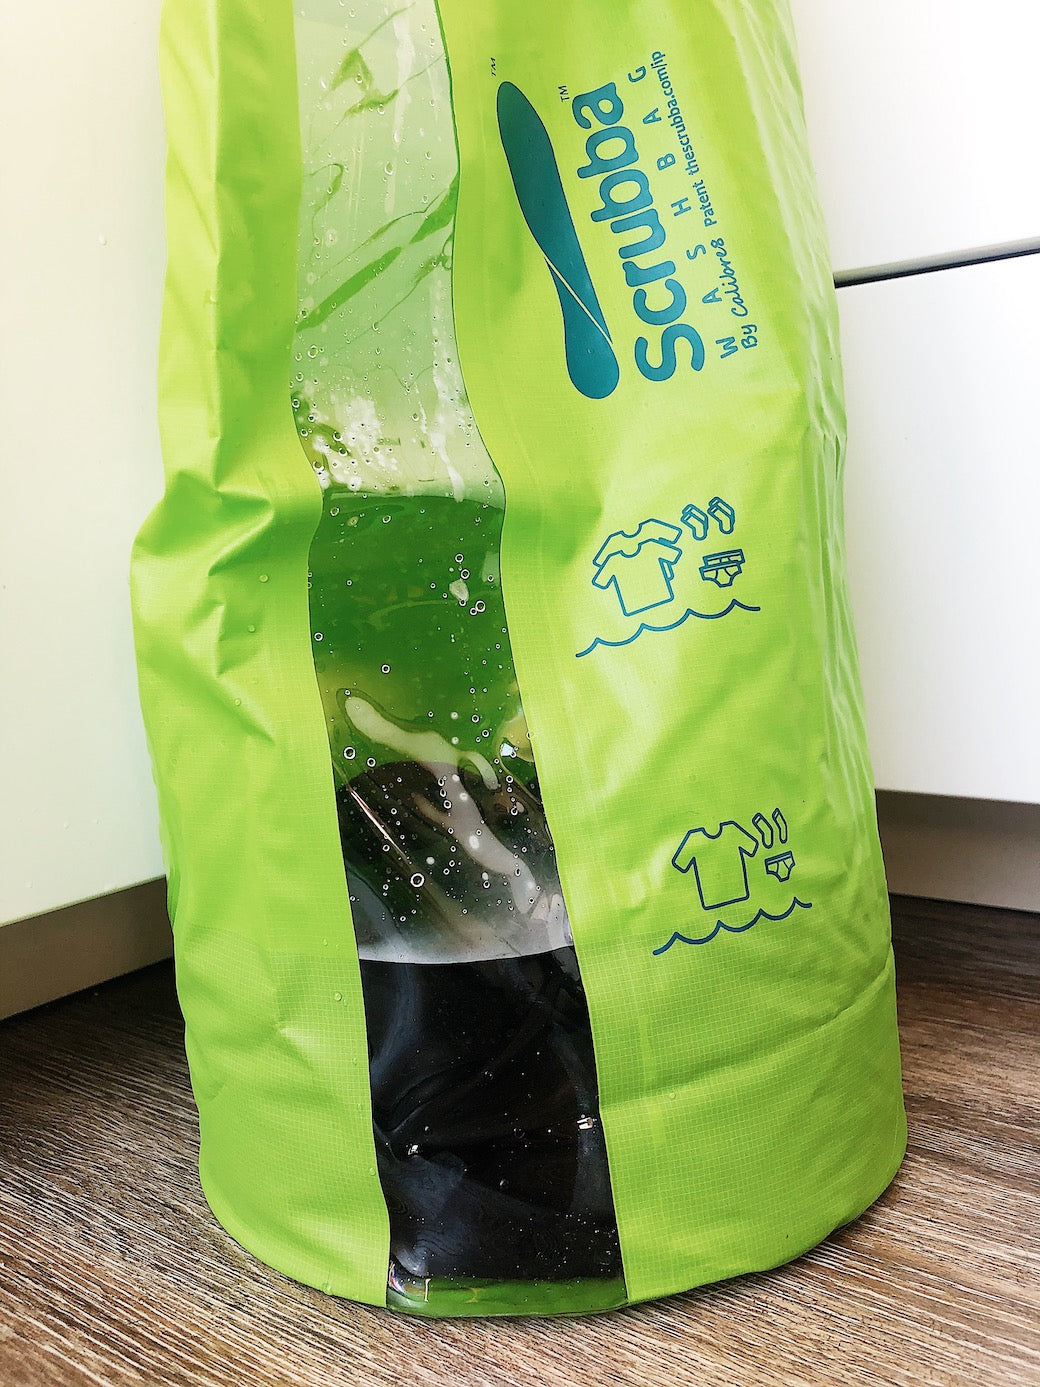 Scrubba Wash Bag Review: Travel With a Portable Washing Machine!